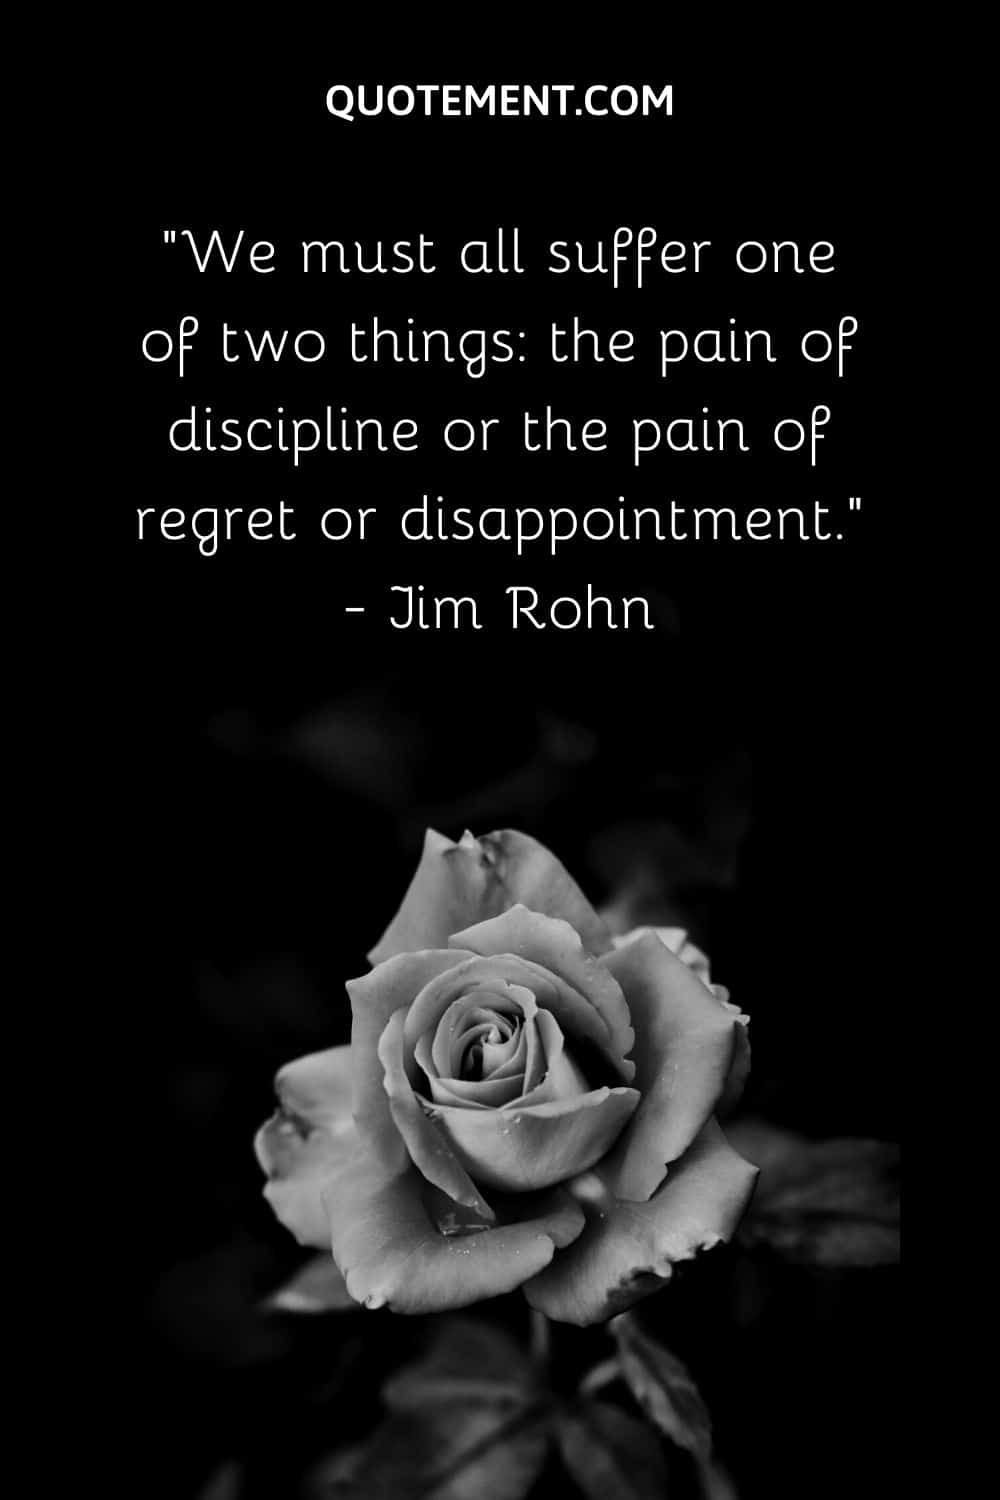 We must all suffer one of two things the pain of discipline or the pain of regret or disappointment.